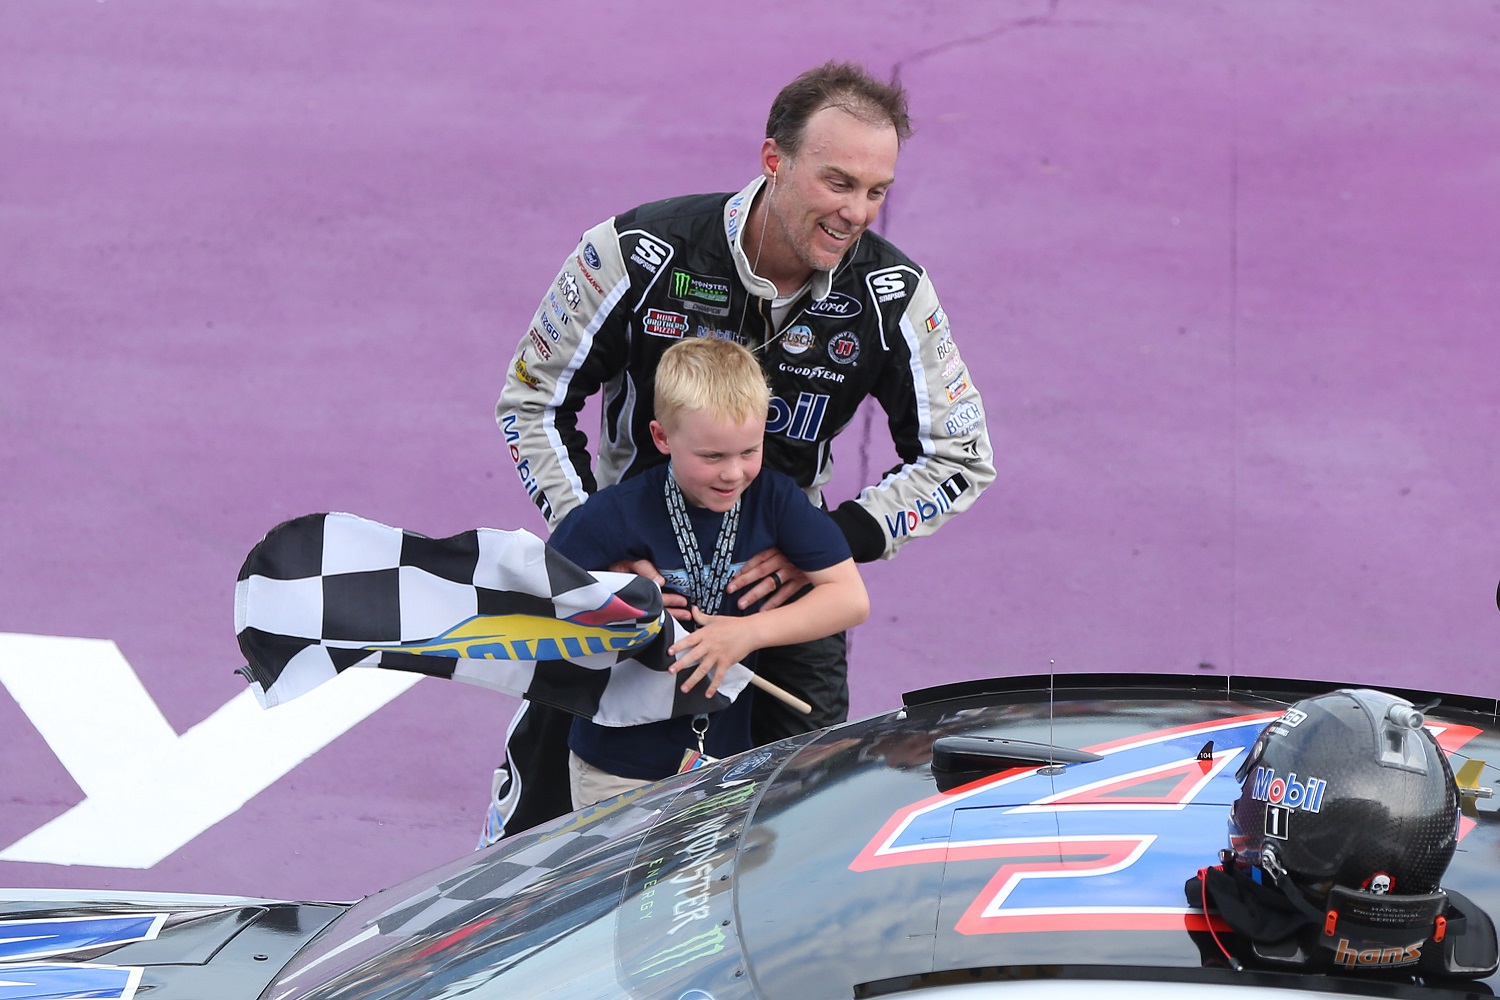 Kevin Harvick helps his son Keelan into the car with the checkered flag after winning the 2019 NASCAR Cup Series Consumers Energy 400 at Michigan International Speedway. | Photo by Matt Sullivan/Getty Images